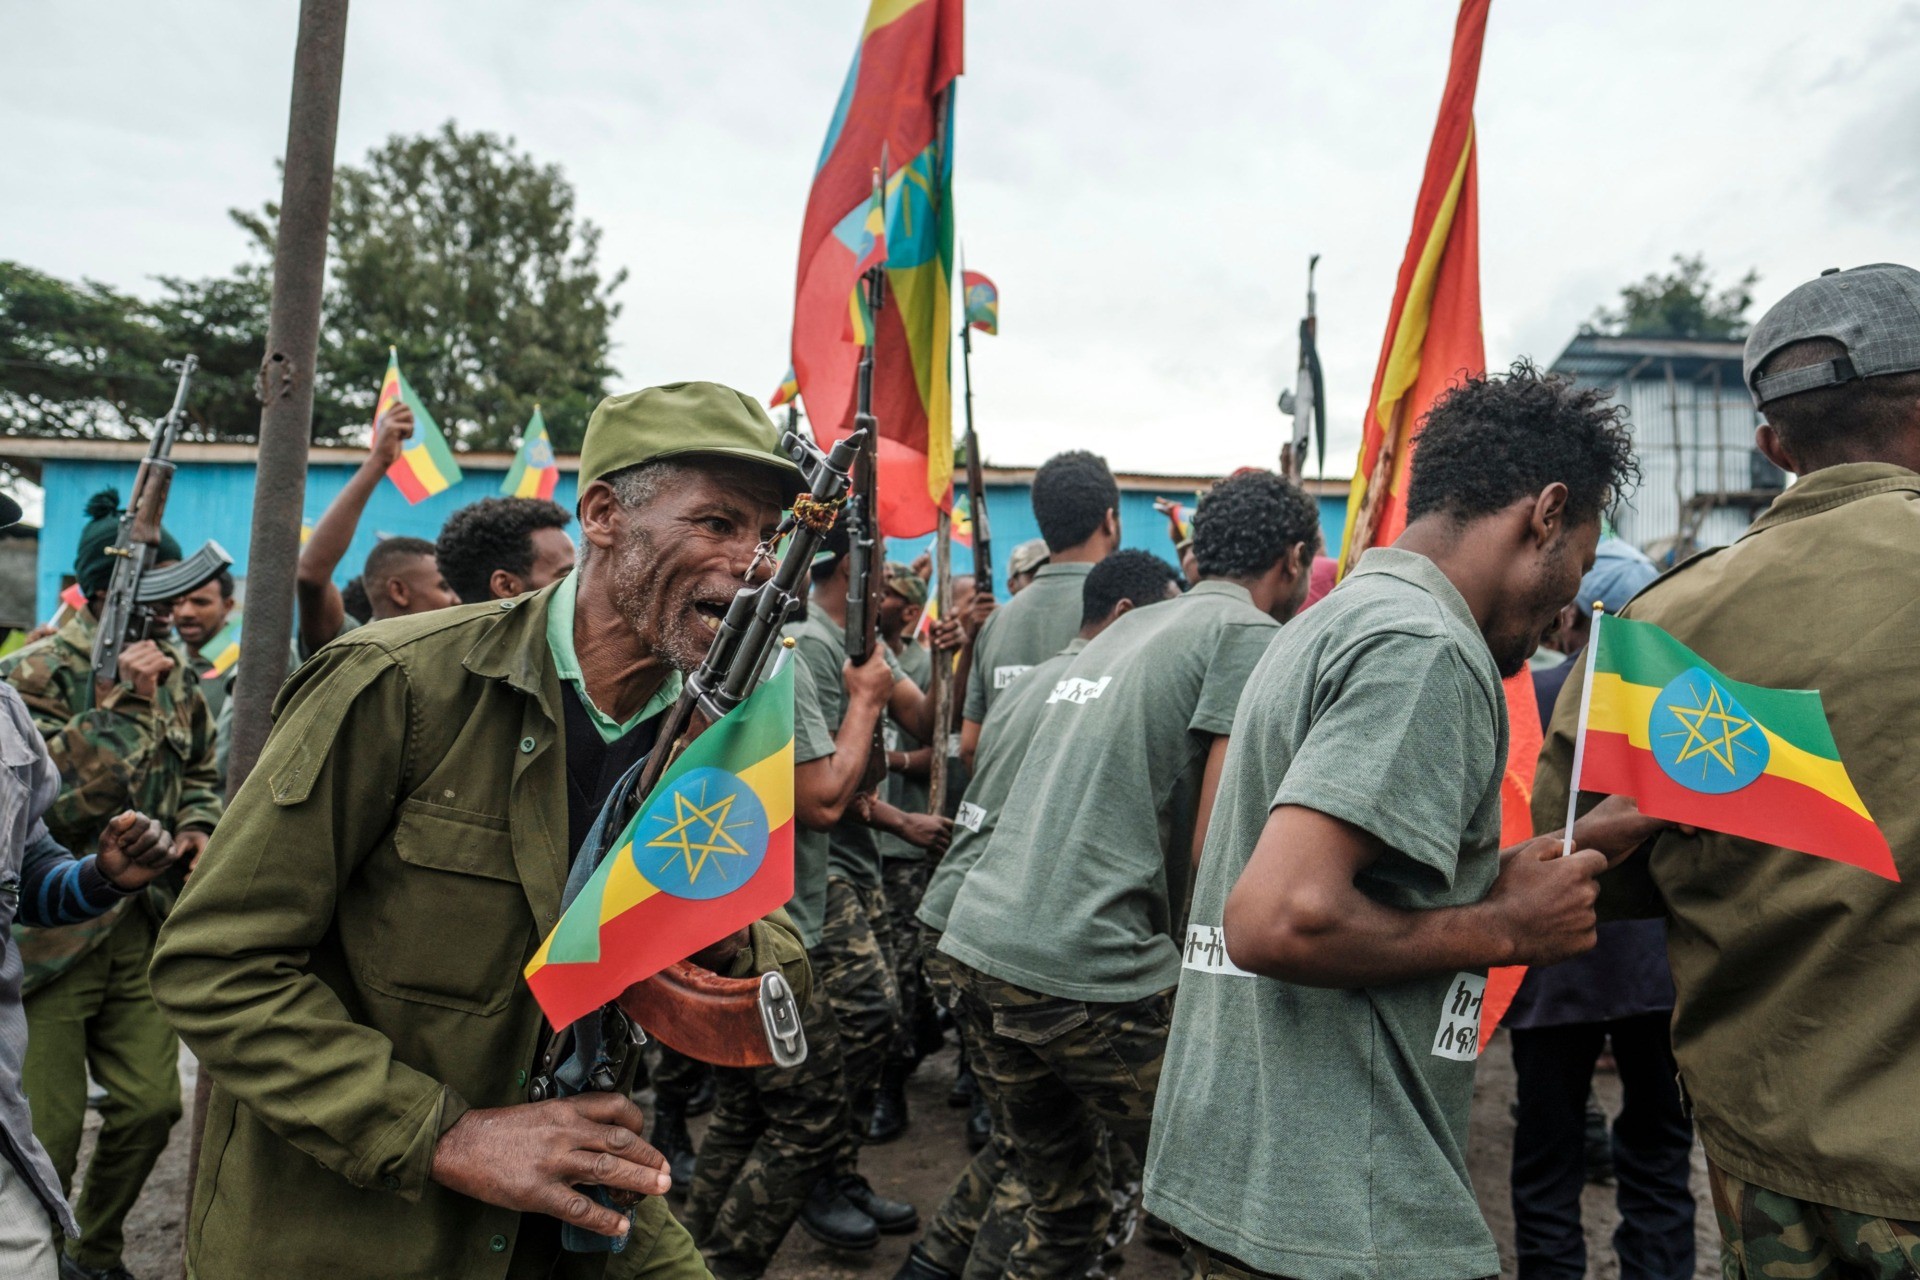 Recruits for reserves of Amhara regional forces, together with members of the Amhara militia, celebrate during their graduation ceremony, in the city of Dessie, Ethiopia, on August 24, 2021. - Long confined to Tigray, the conflict in Ethiopia has recently spread to two neighbouring regions, Afar and Amhara, with heavy weapons fire killing an untold number of civilians and displacing hundreds of thousands more. (Photo by EDUARDO SOTERAS / AFP) (Photo by EDUARDO SOTERAS/AFP via Getty Images)